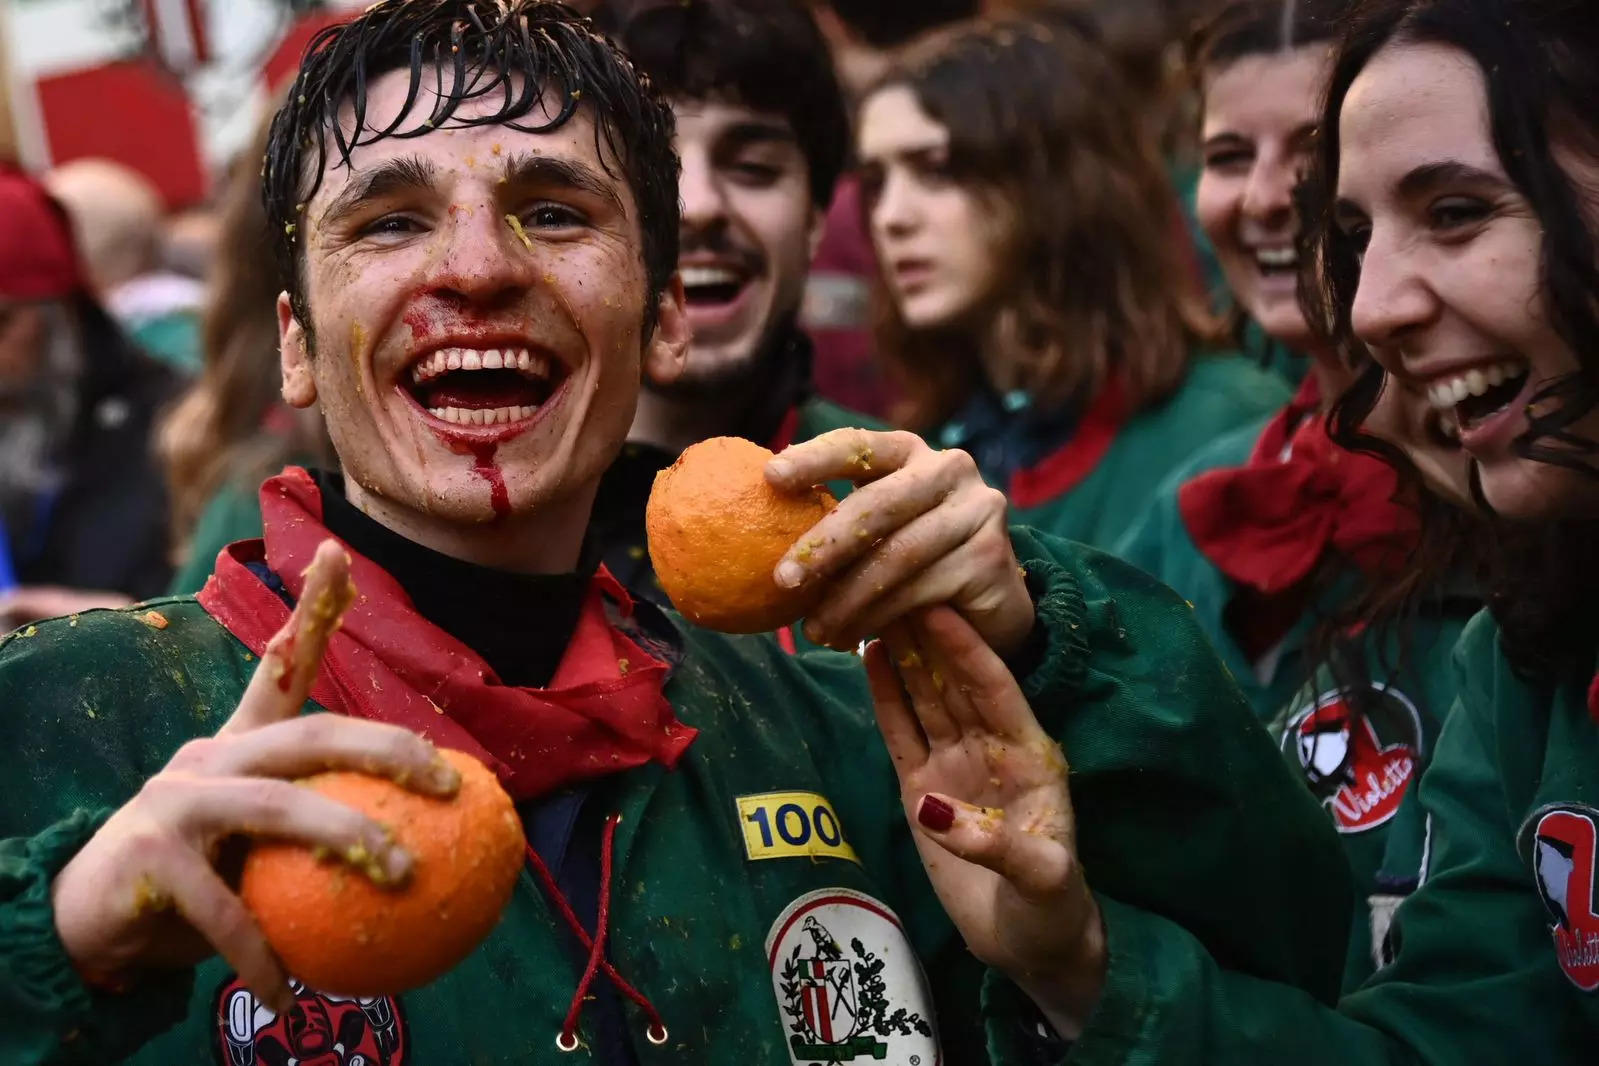 Fun-filled images from Italy's craziest festival ‘Battle of Oranges’